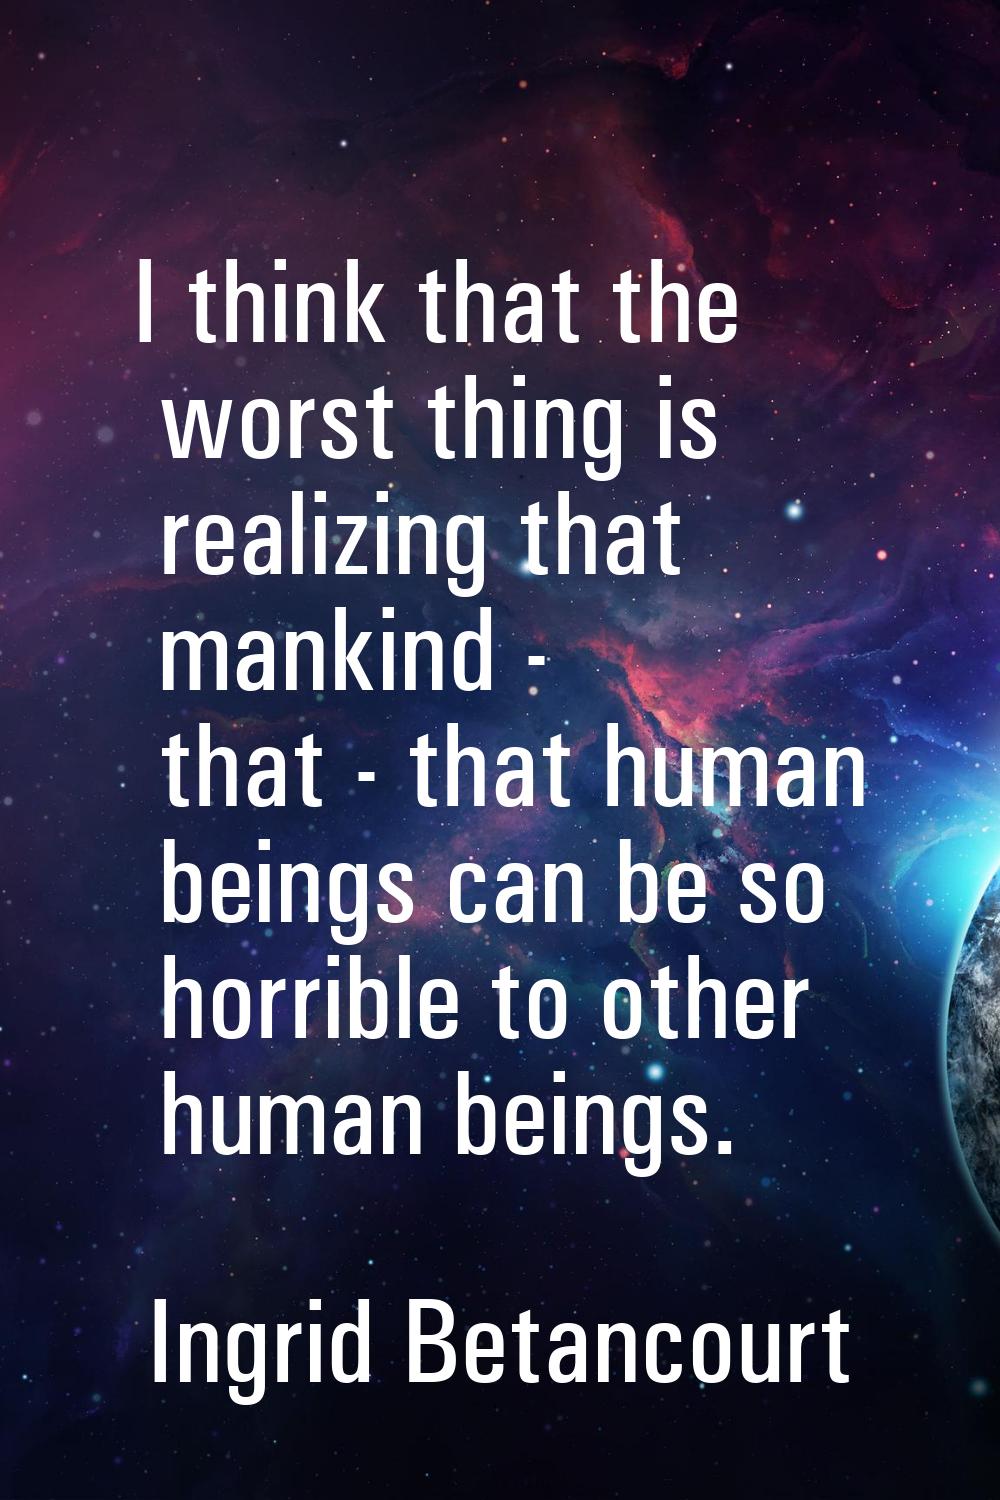 I think that the worst thing is realizing that mankind - that - that human beings can be so horribl